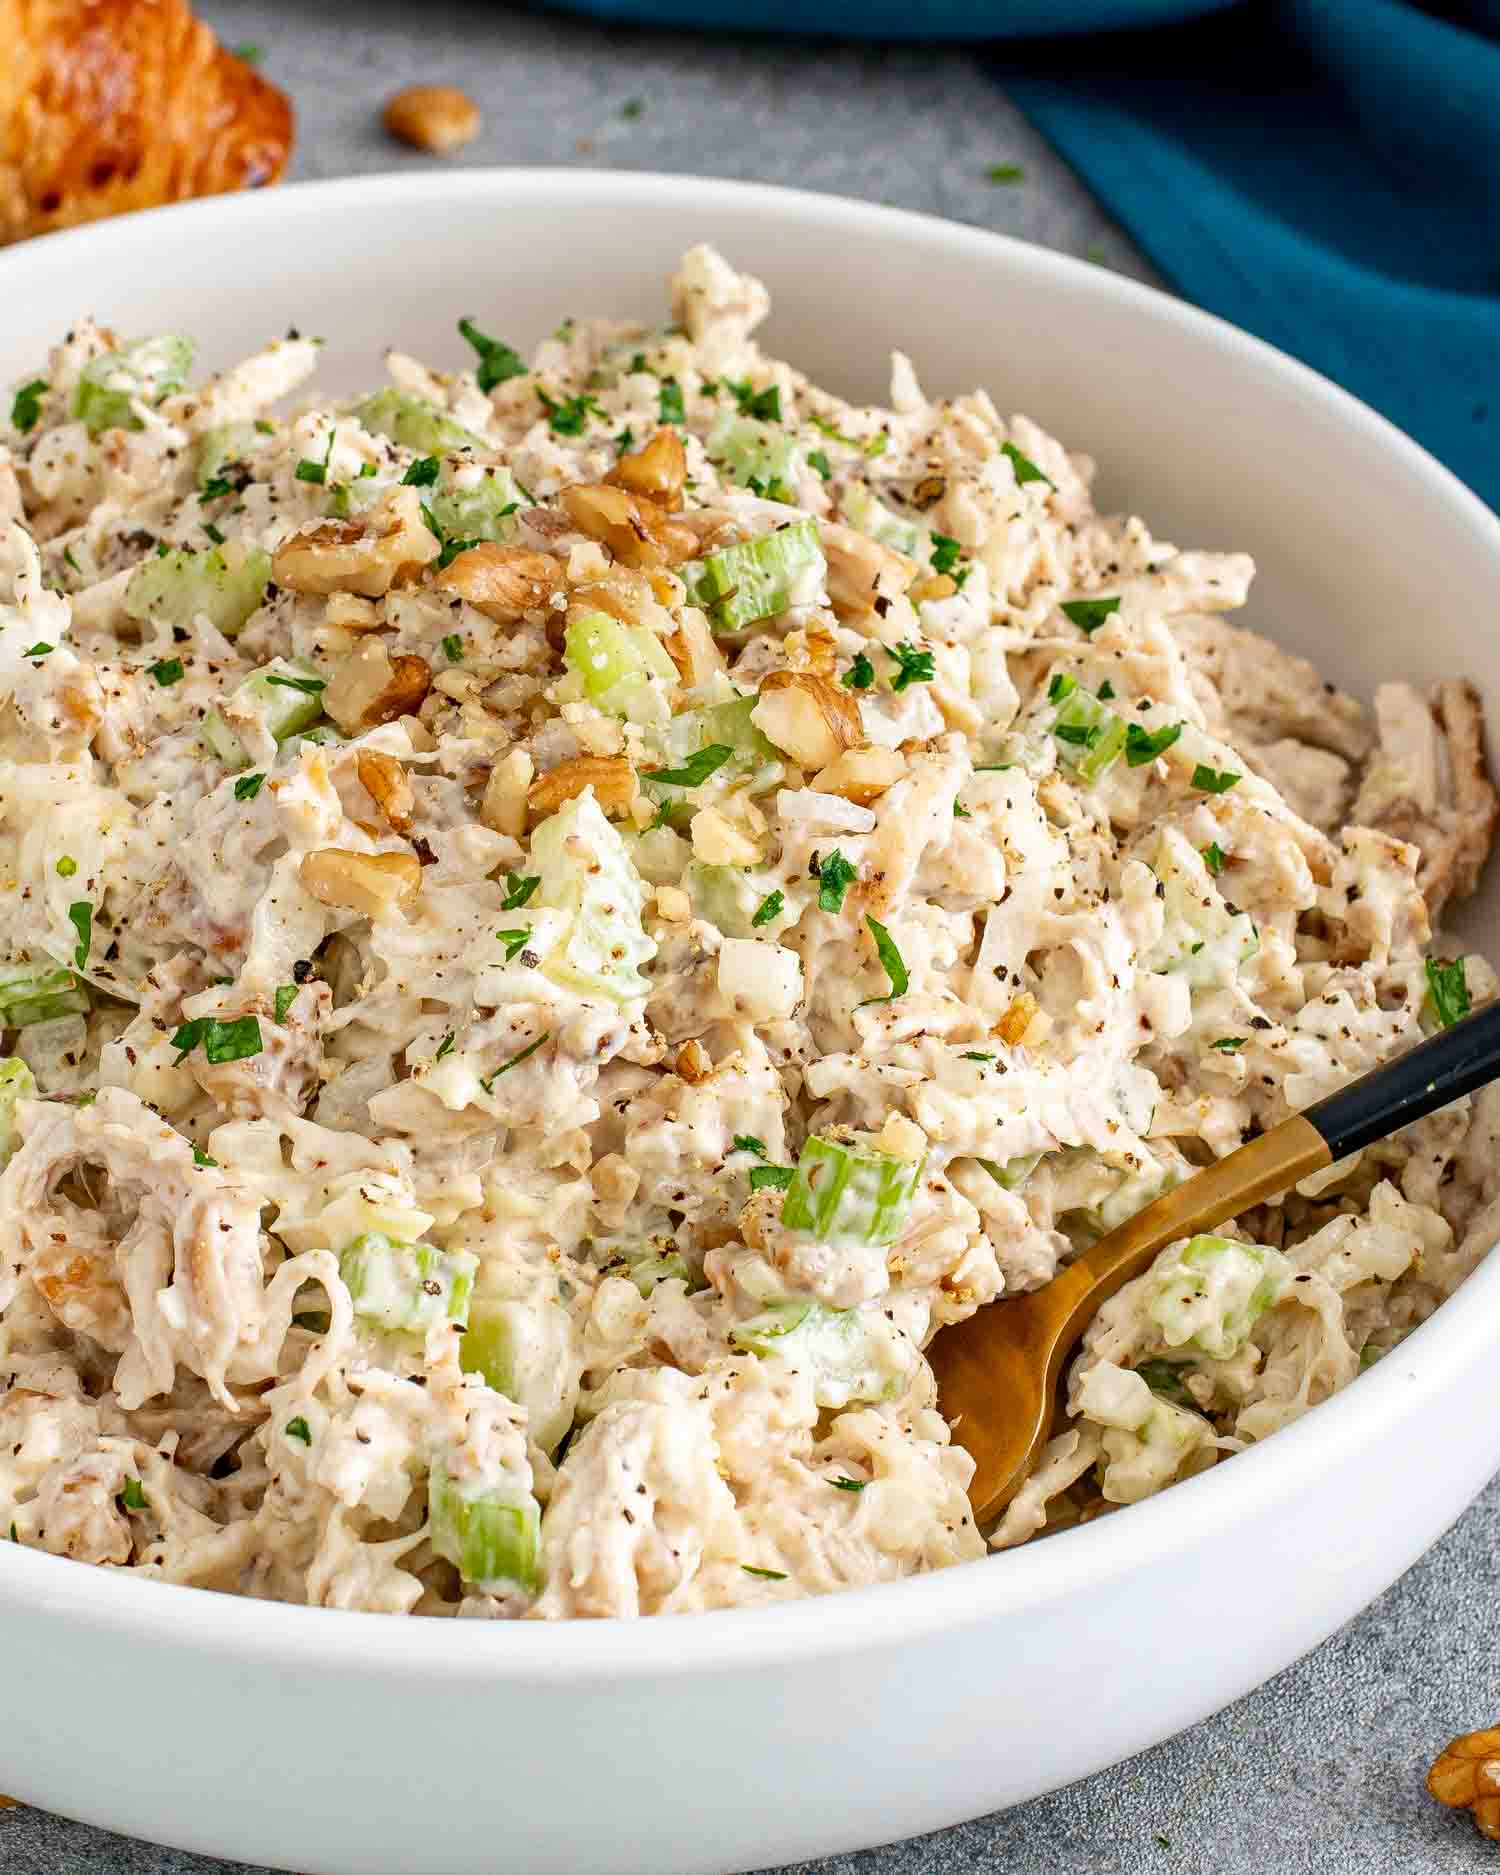 freshly made chicken salad in a white bowl garnished with a few extra crunchy walnuts.